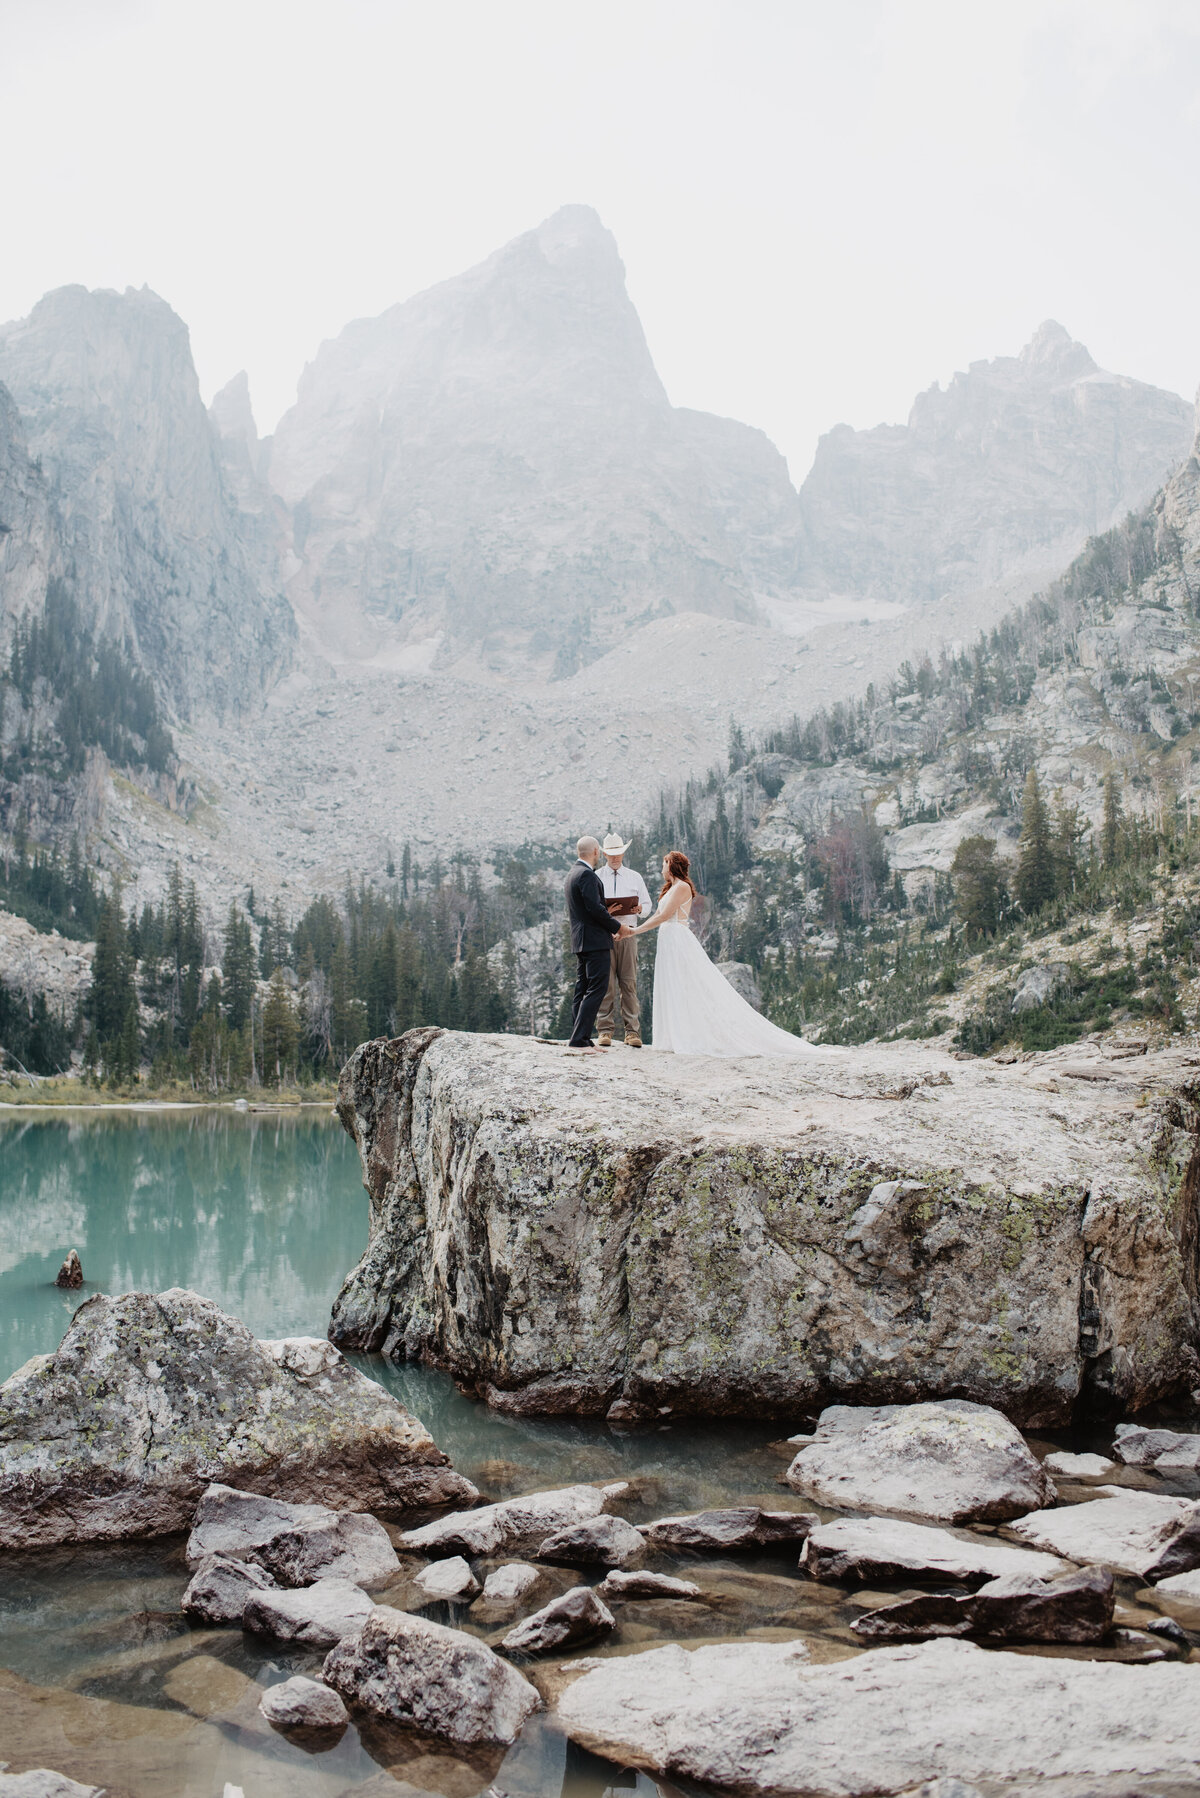 Jackson Hole photographers capture bride and groom holding hands at wedding ceremony